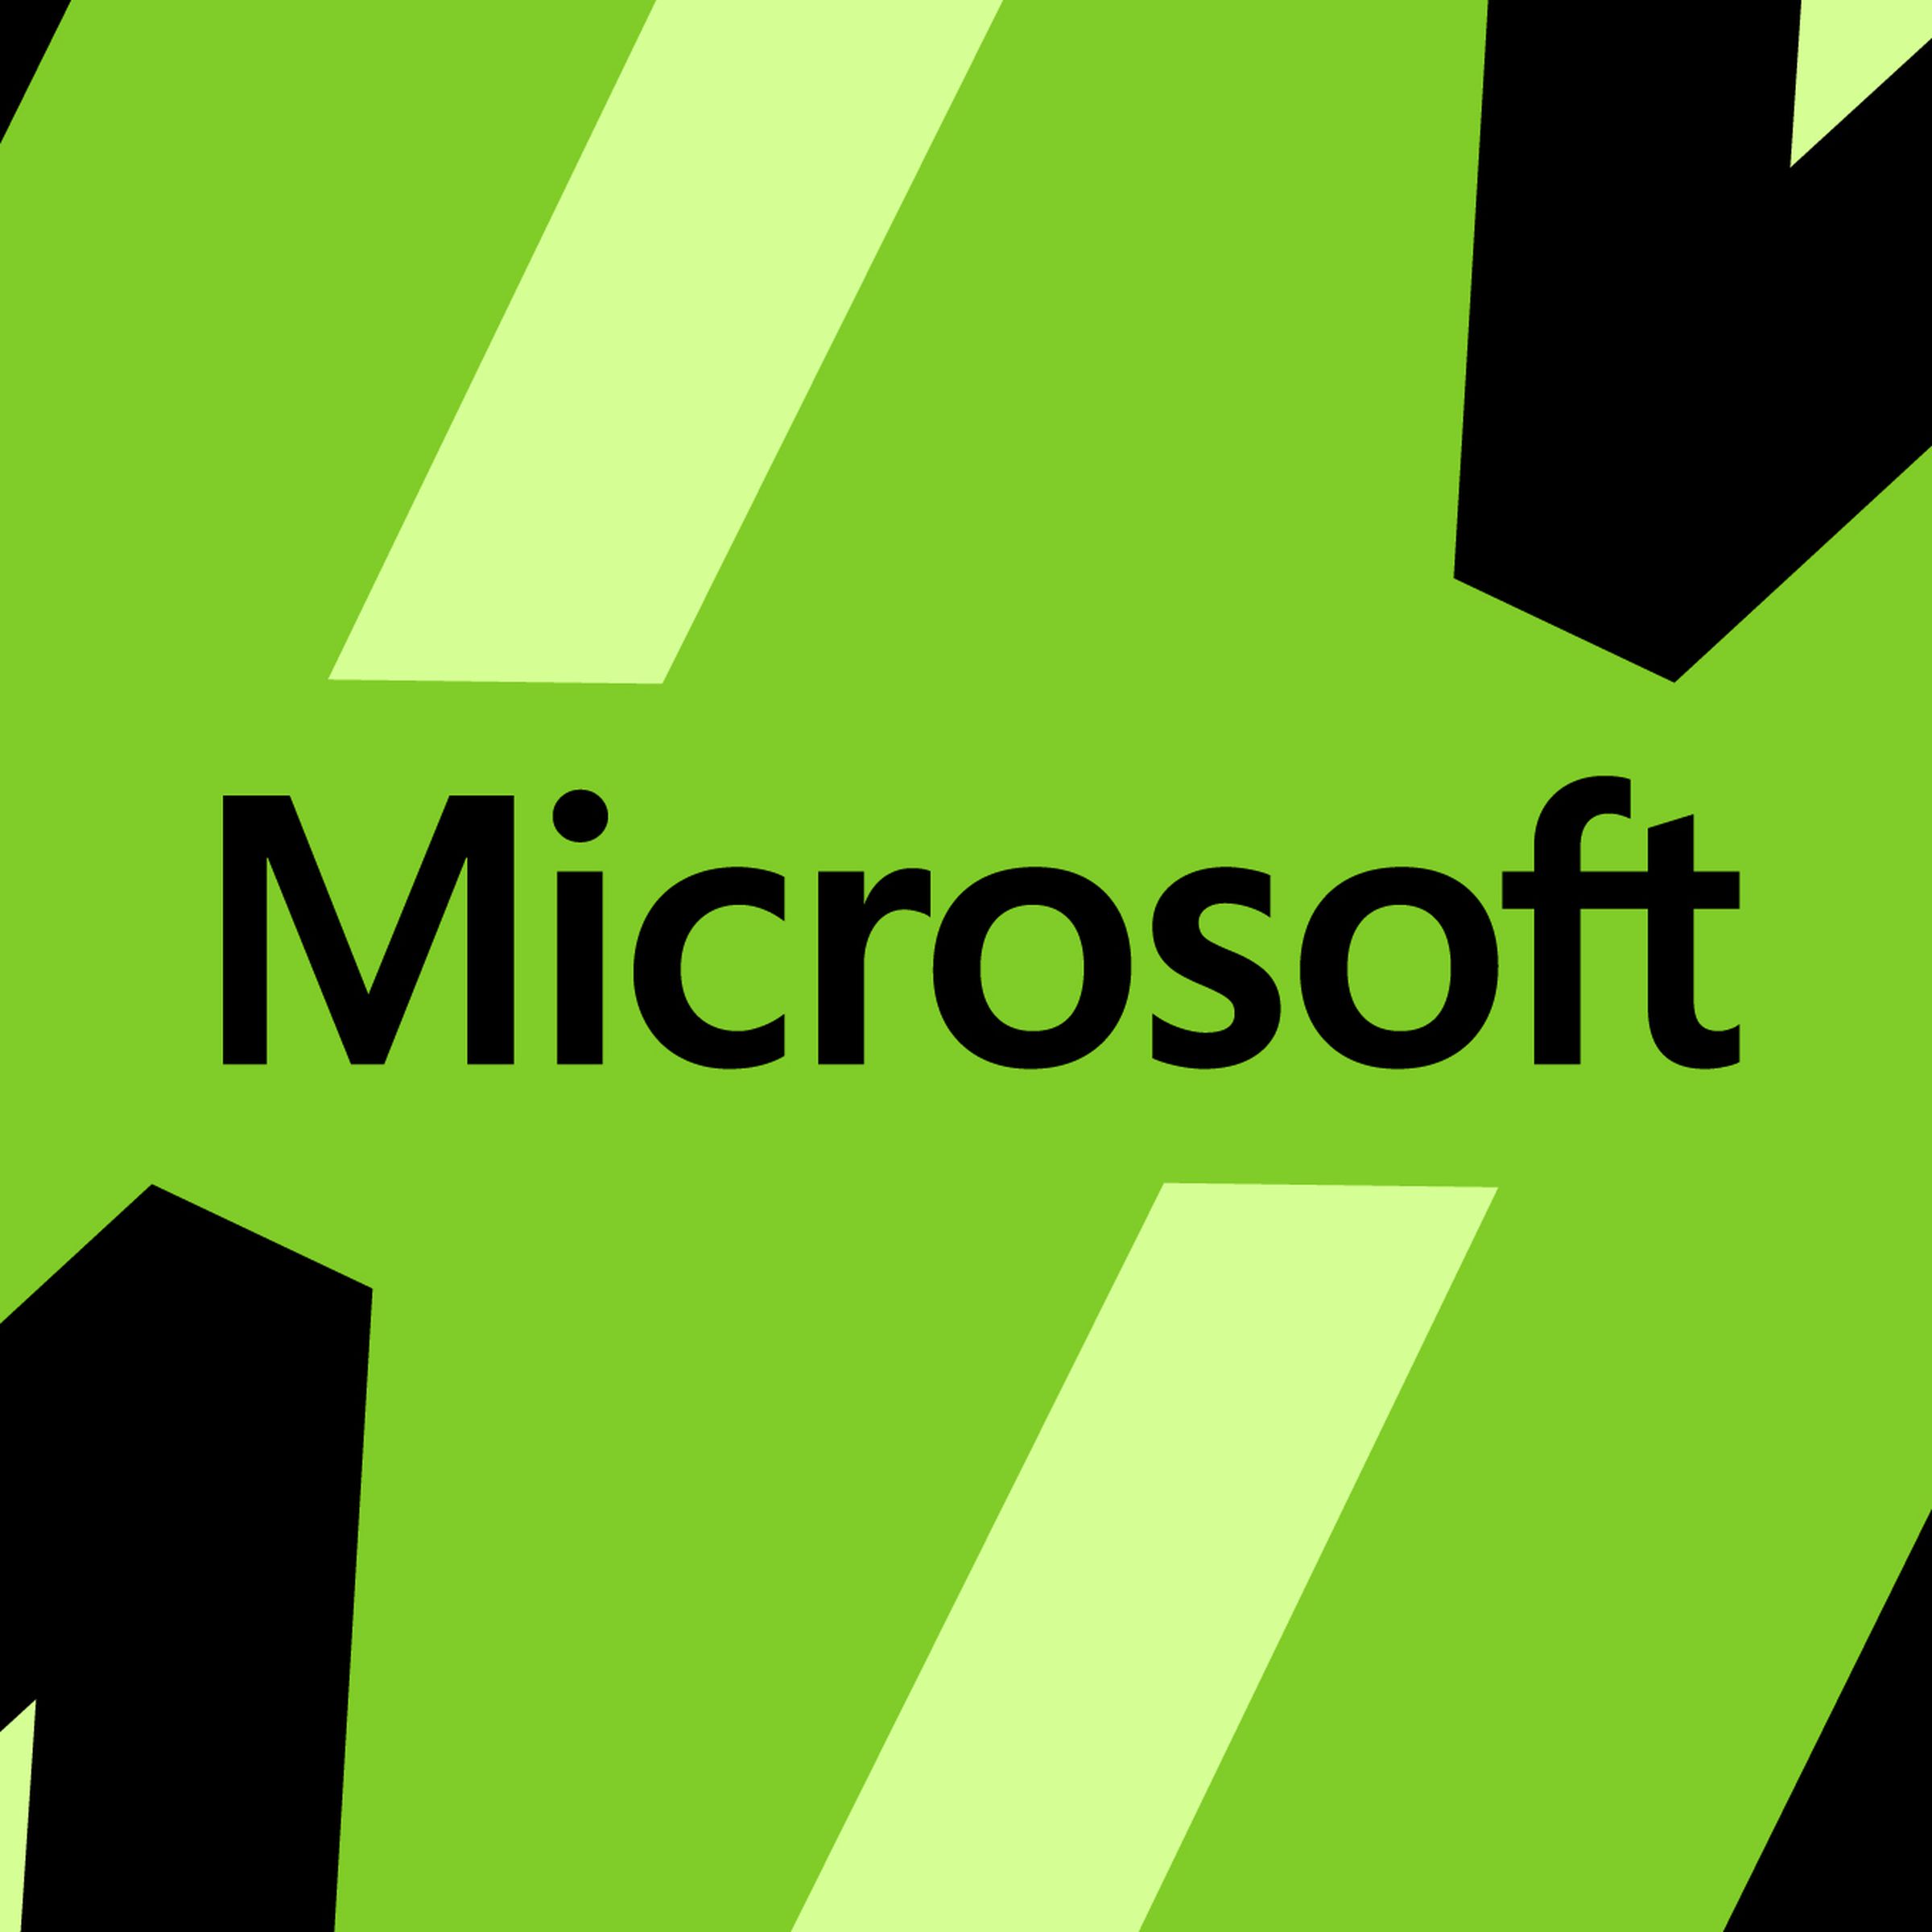 Illustration of the Microsoft wordmark on a green background